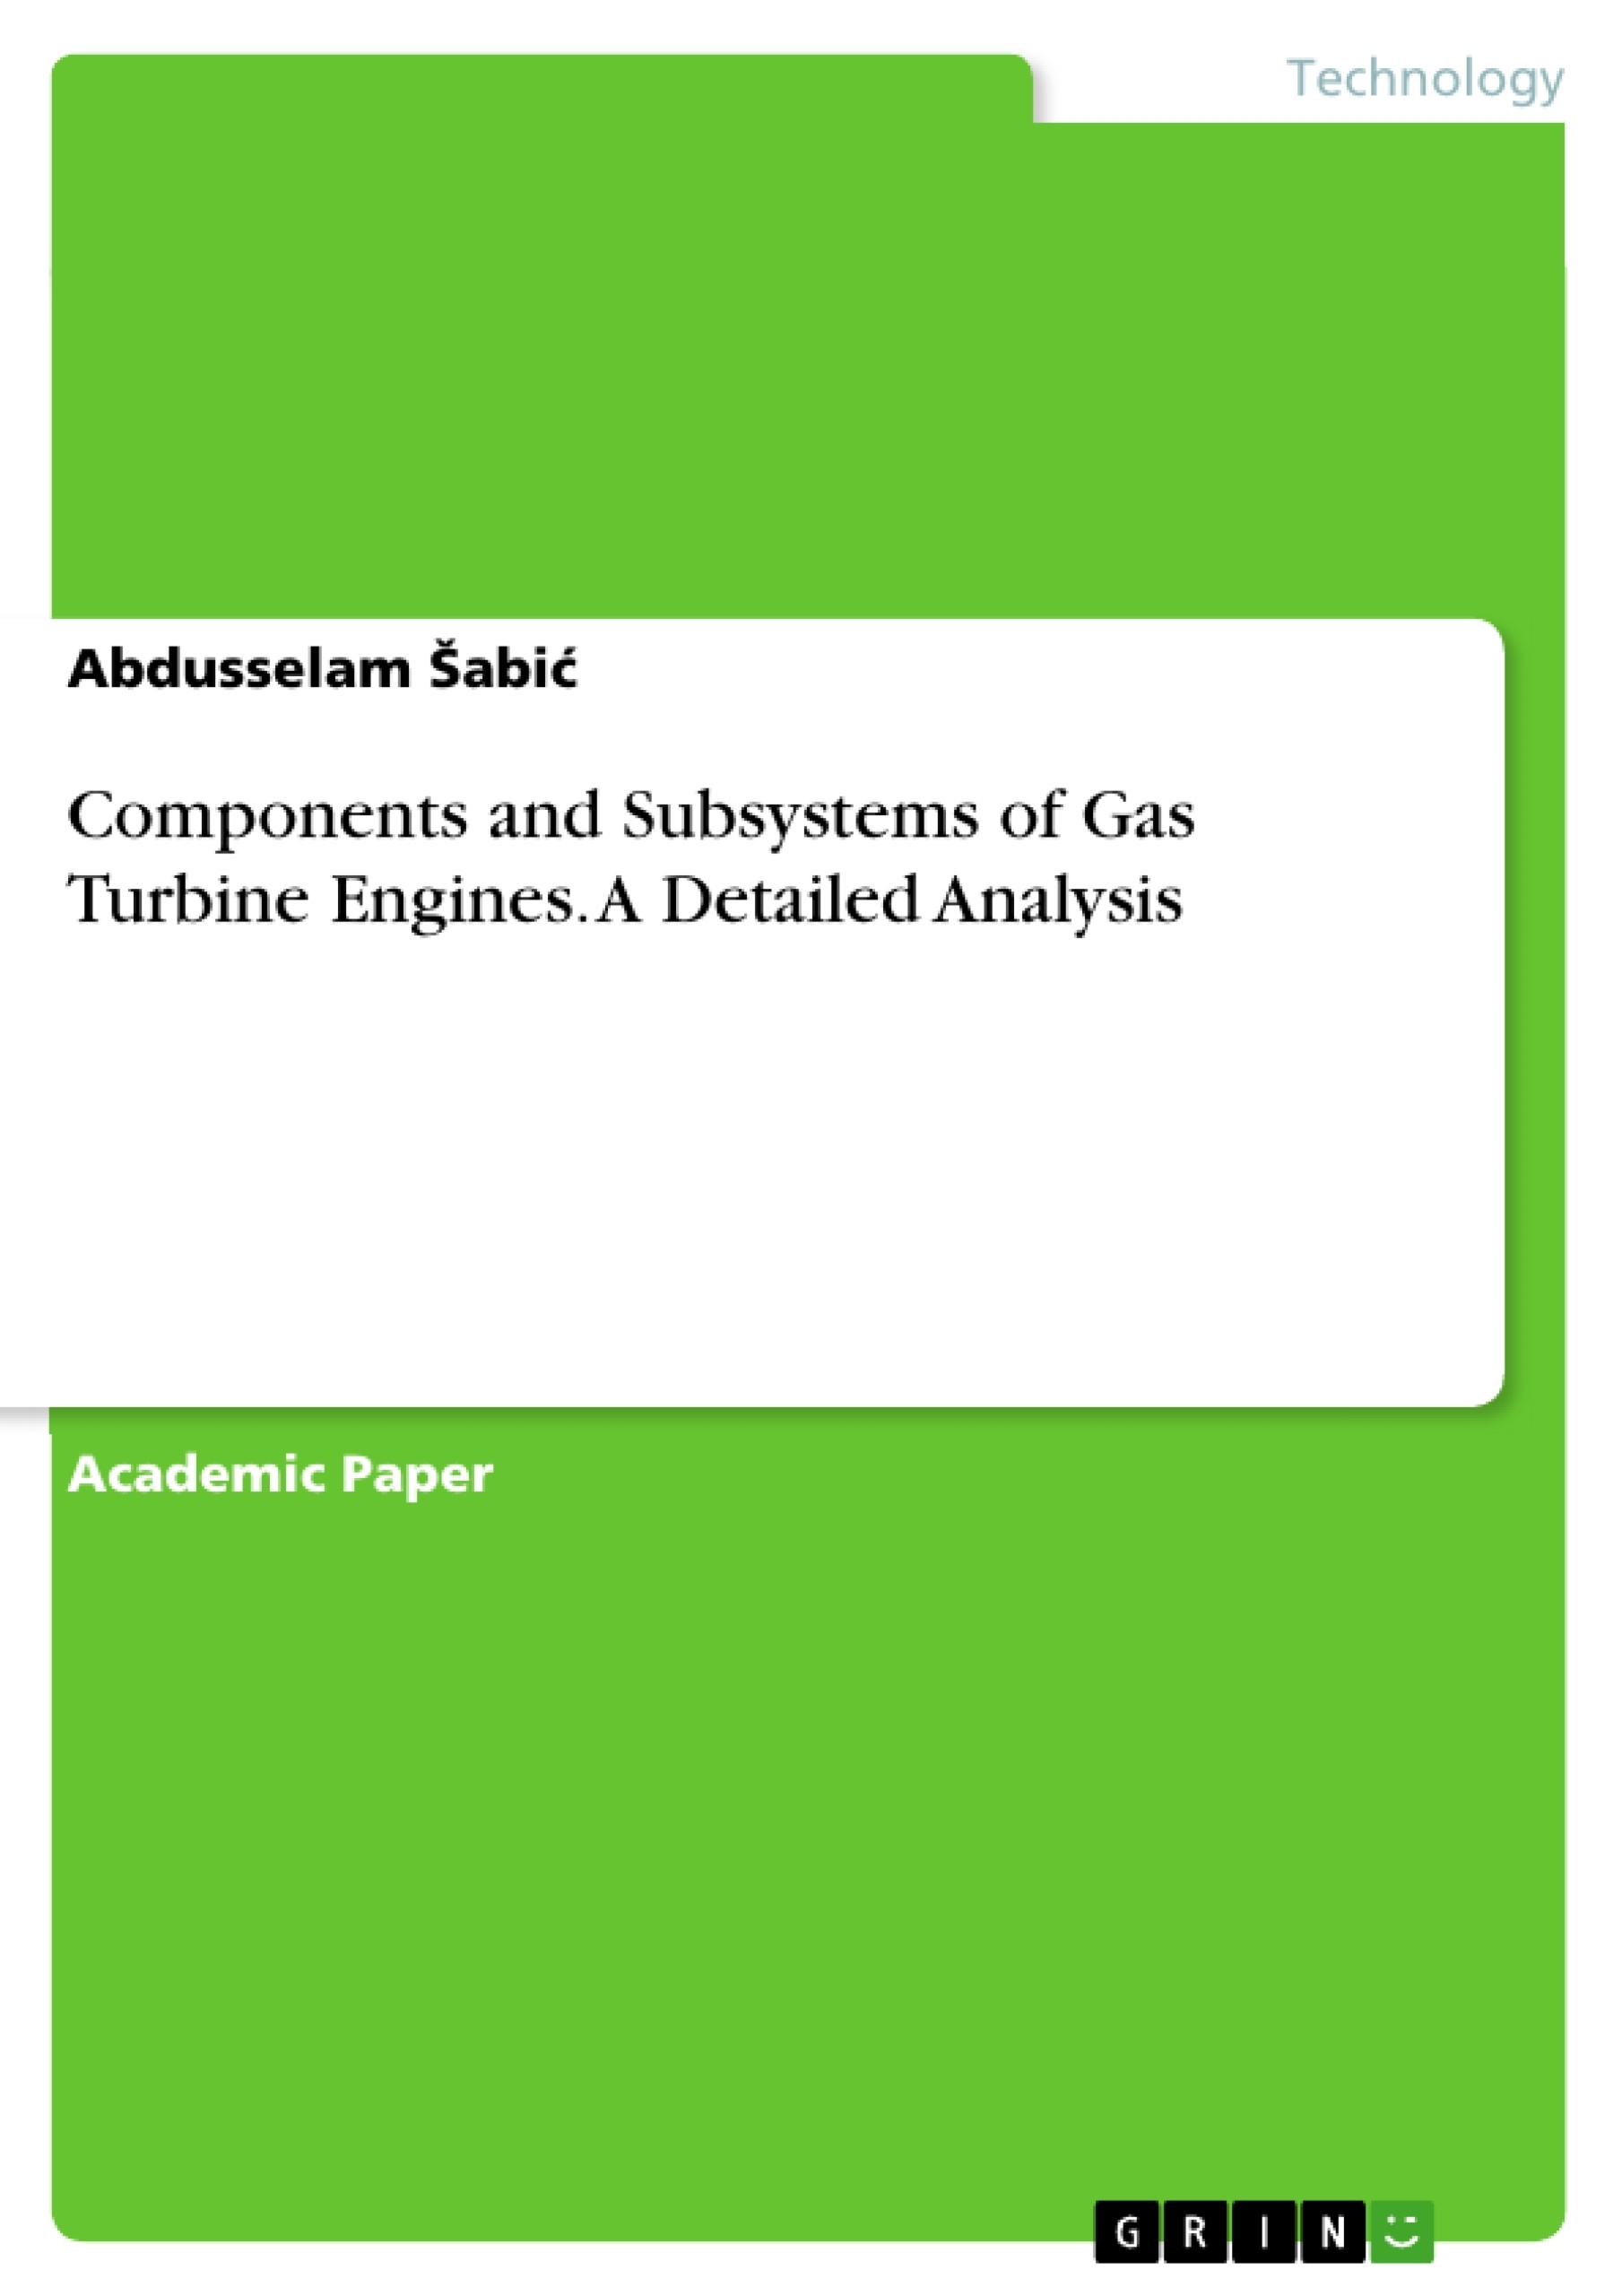 Title: Components and Subsystems of Gas Turbine Engines. A Detailed Analysis